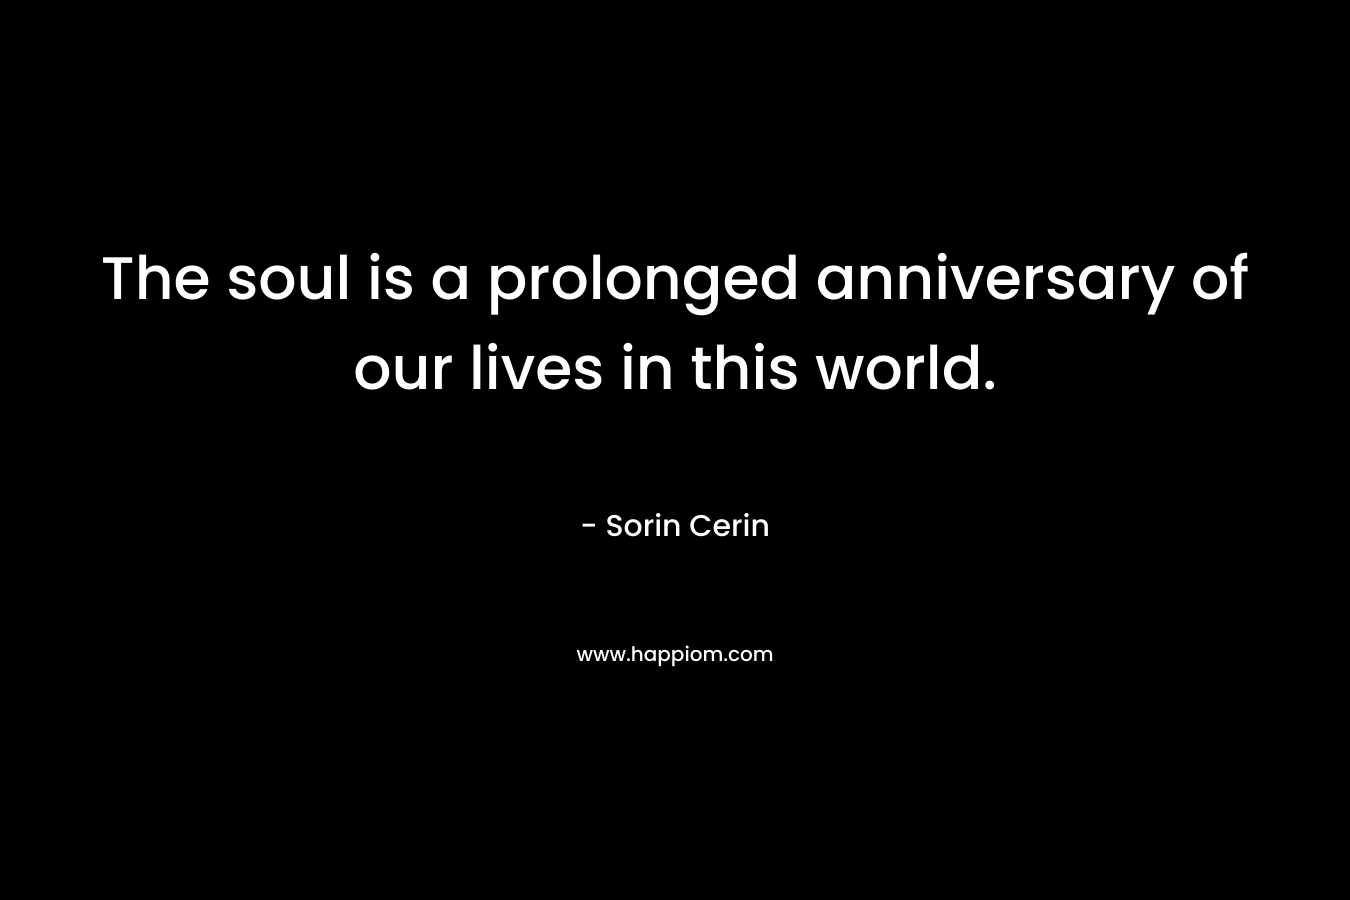 The soul is a prolonged anniversary of our lives in this world. – Sorin Cerin